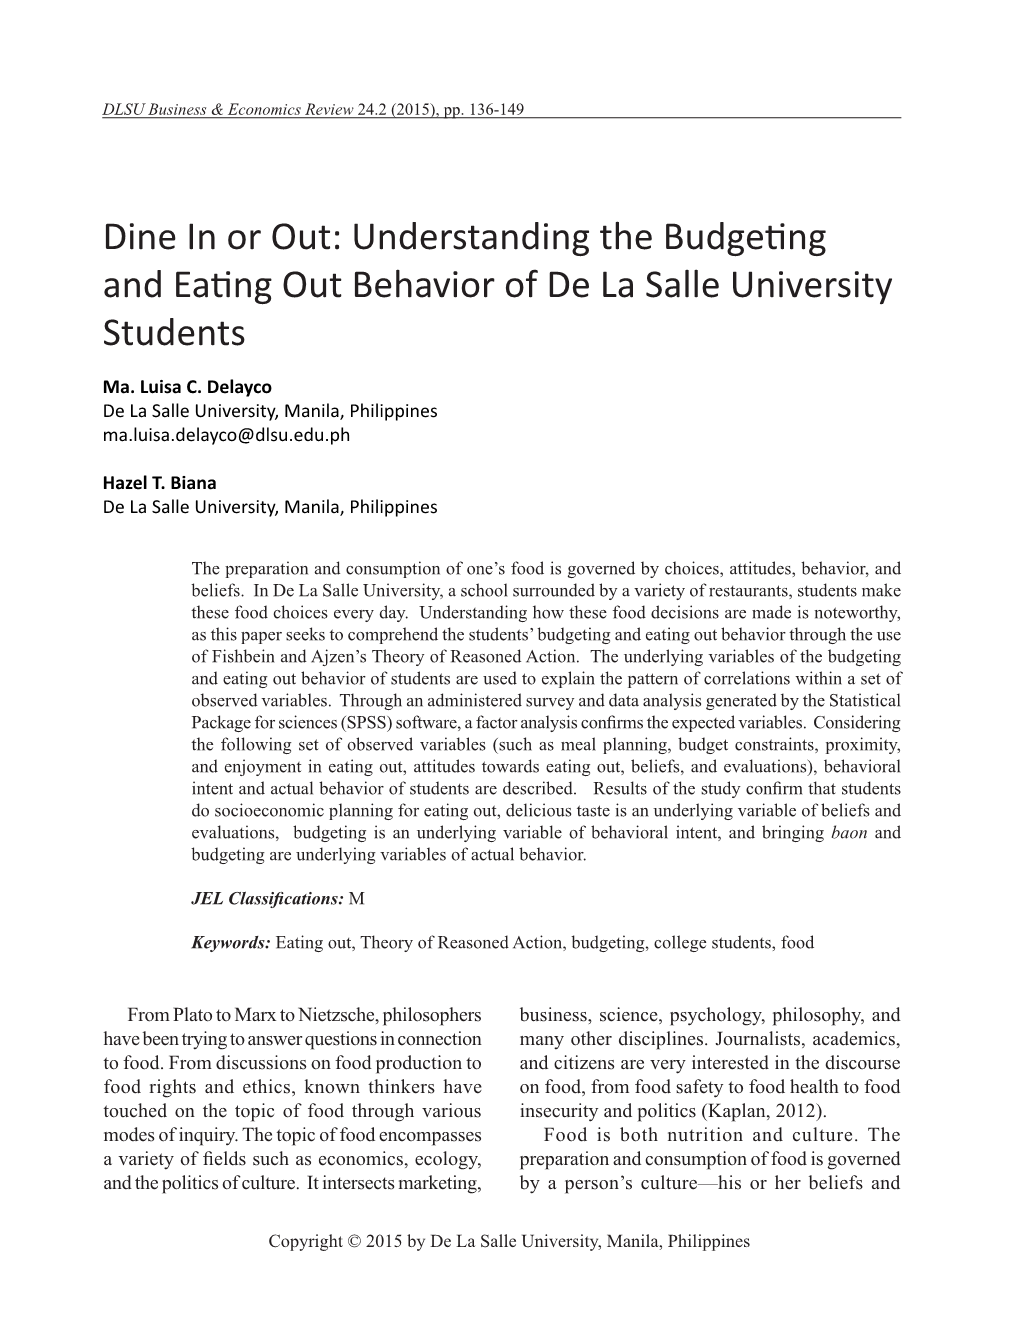 Dine in Or Out: Understanding the Budgeting and Eating out Behavior of De La Salle University Students